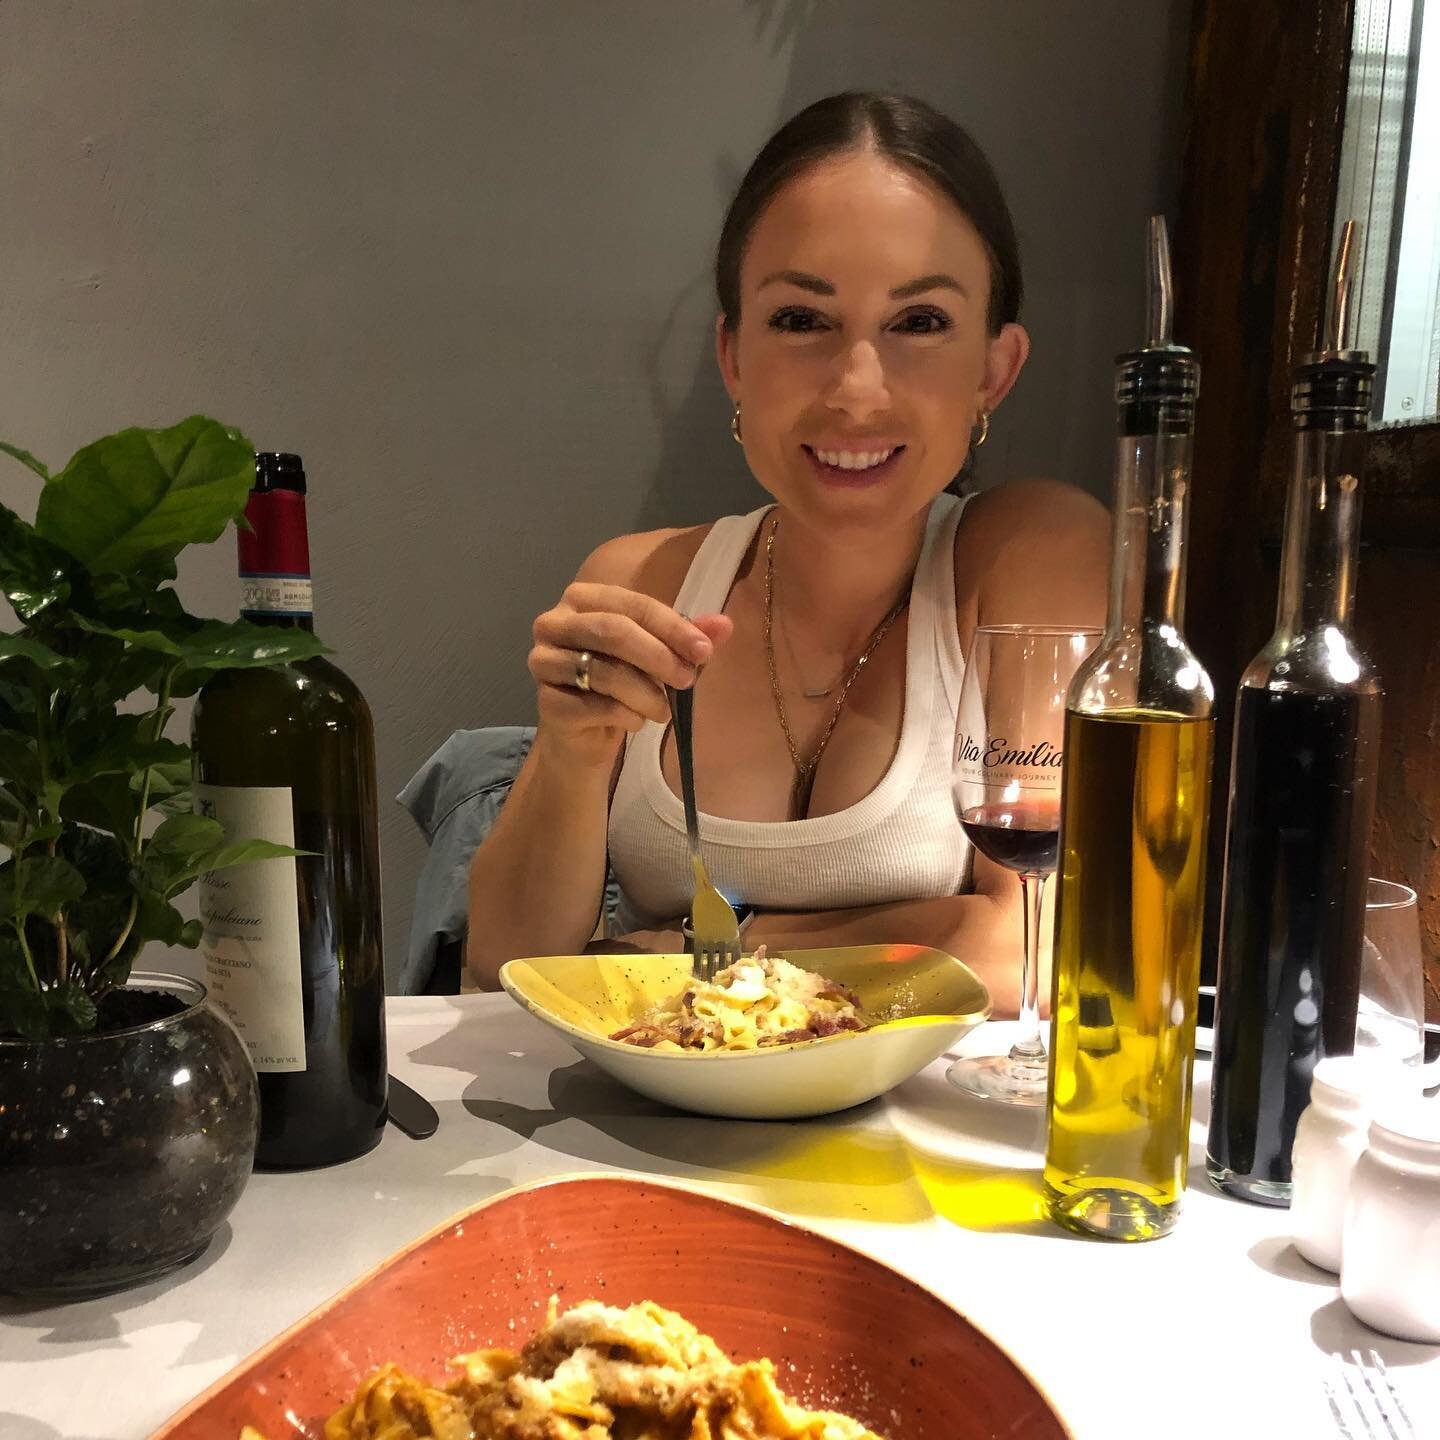 My favorite food group is pasta.😉🙃

If you&rsquo;re in South Florida, check out my favorite pasta dish at Via Emilia 9 in South Beach, it&rsquo;s the Tagliatelle al Prosciutto di Parma. One of my go to dinner spots, @via_emilia9 is the best little 